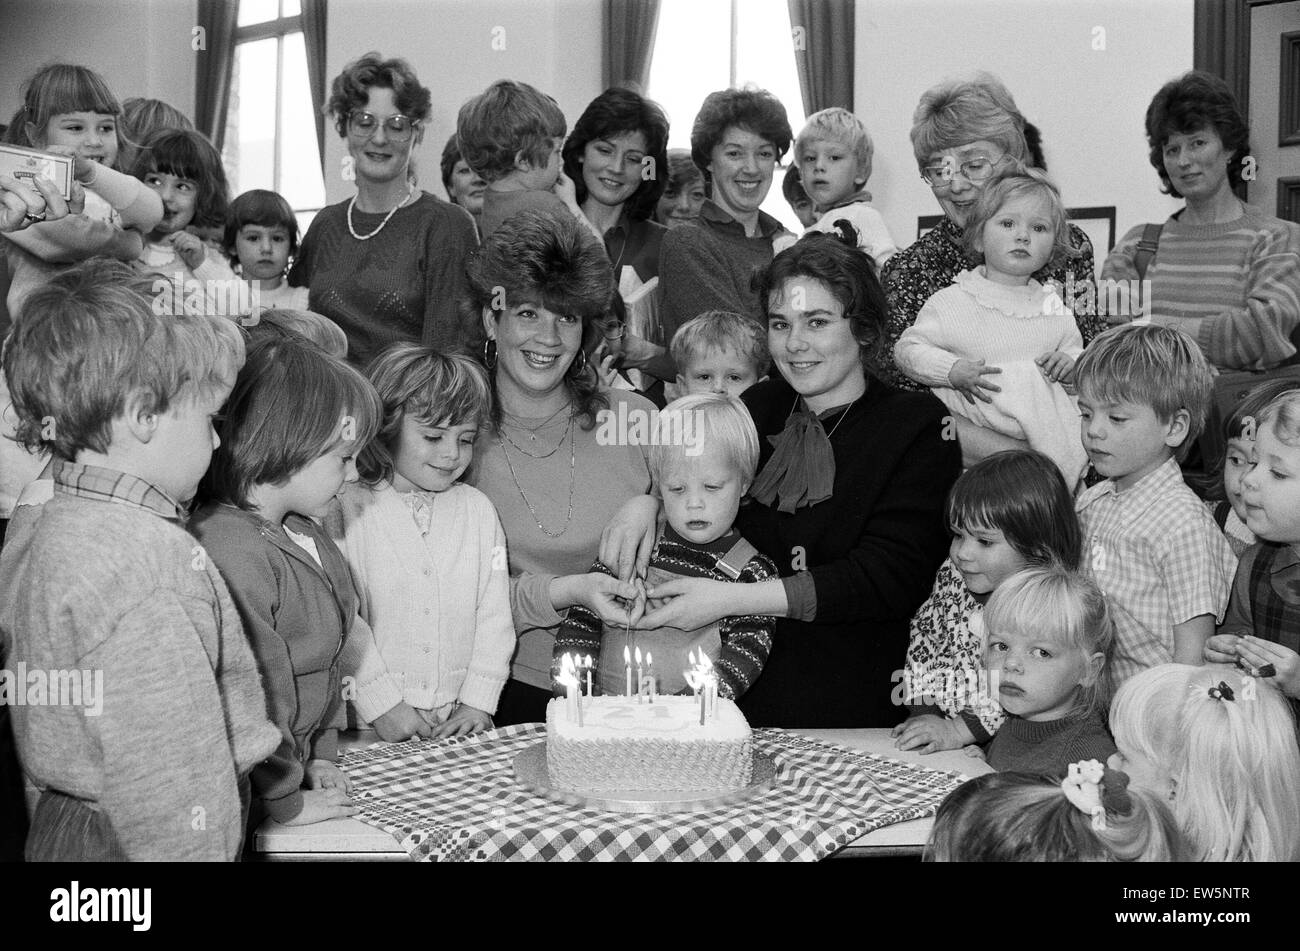 Cowcliffe Playgroup has come of age – and a special party was held for its 21st birthday. Pictured cutting the cake, made by one of the mums, Mrs Dorothy Pearce, are Mrs Helen Hawkyard (left) and Mrs Susan Frain, members of the playgroup when it was found Stock Photo